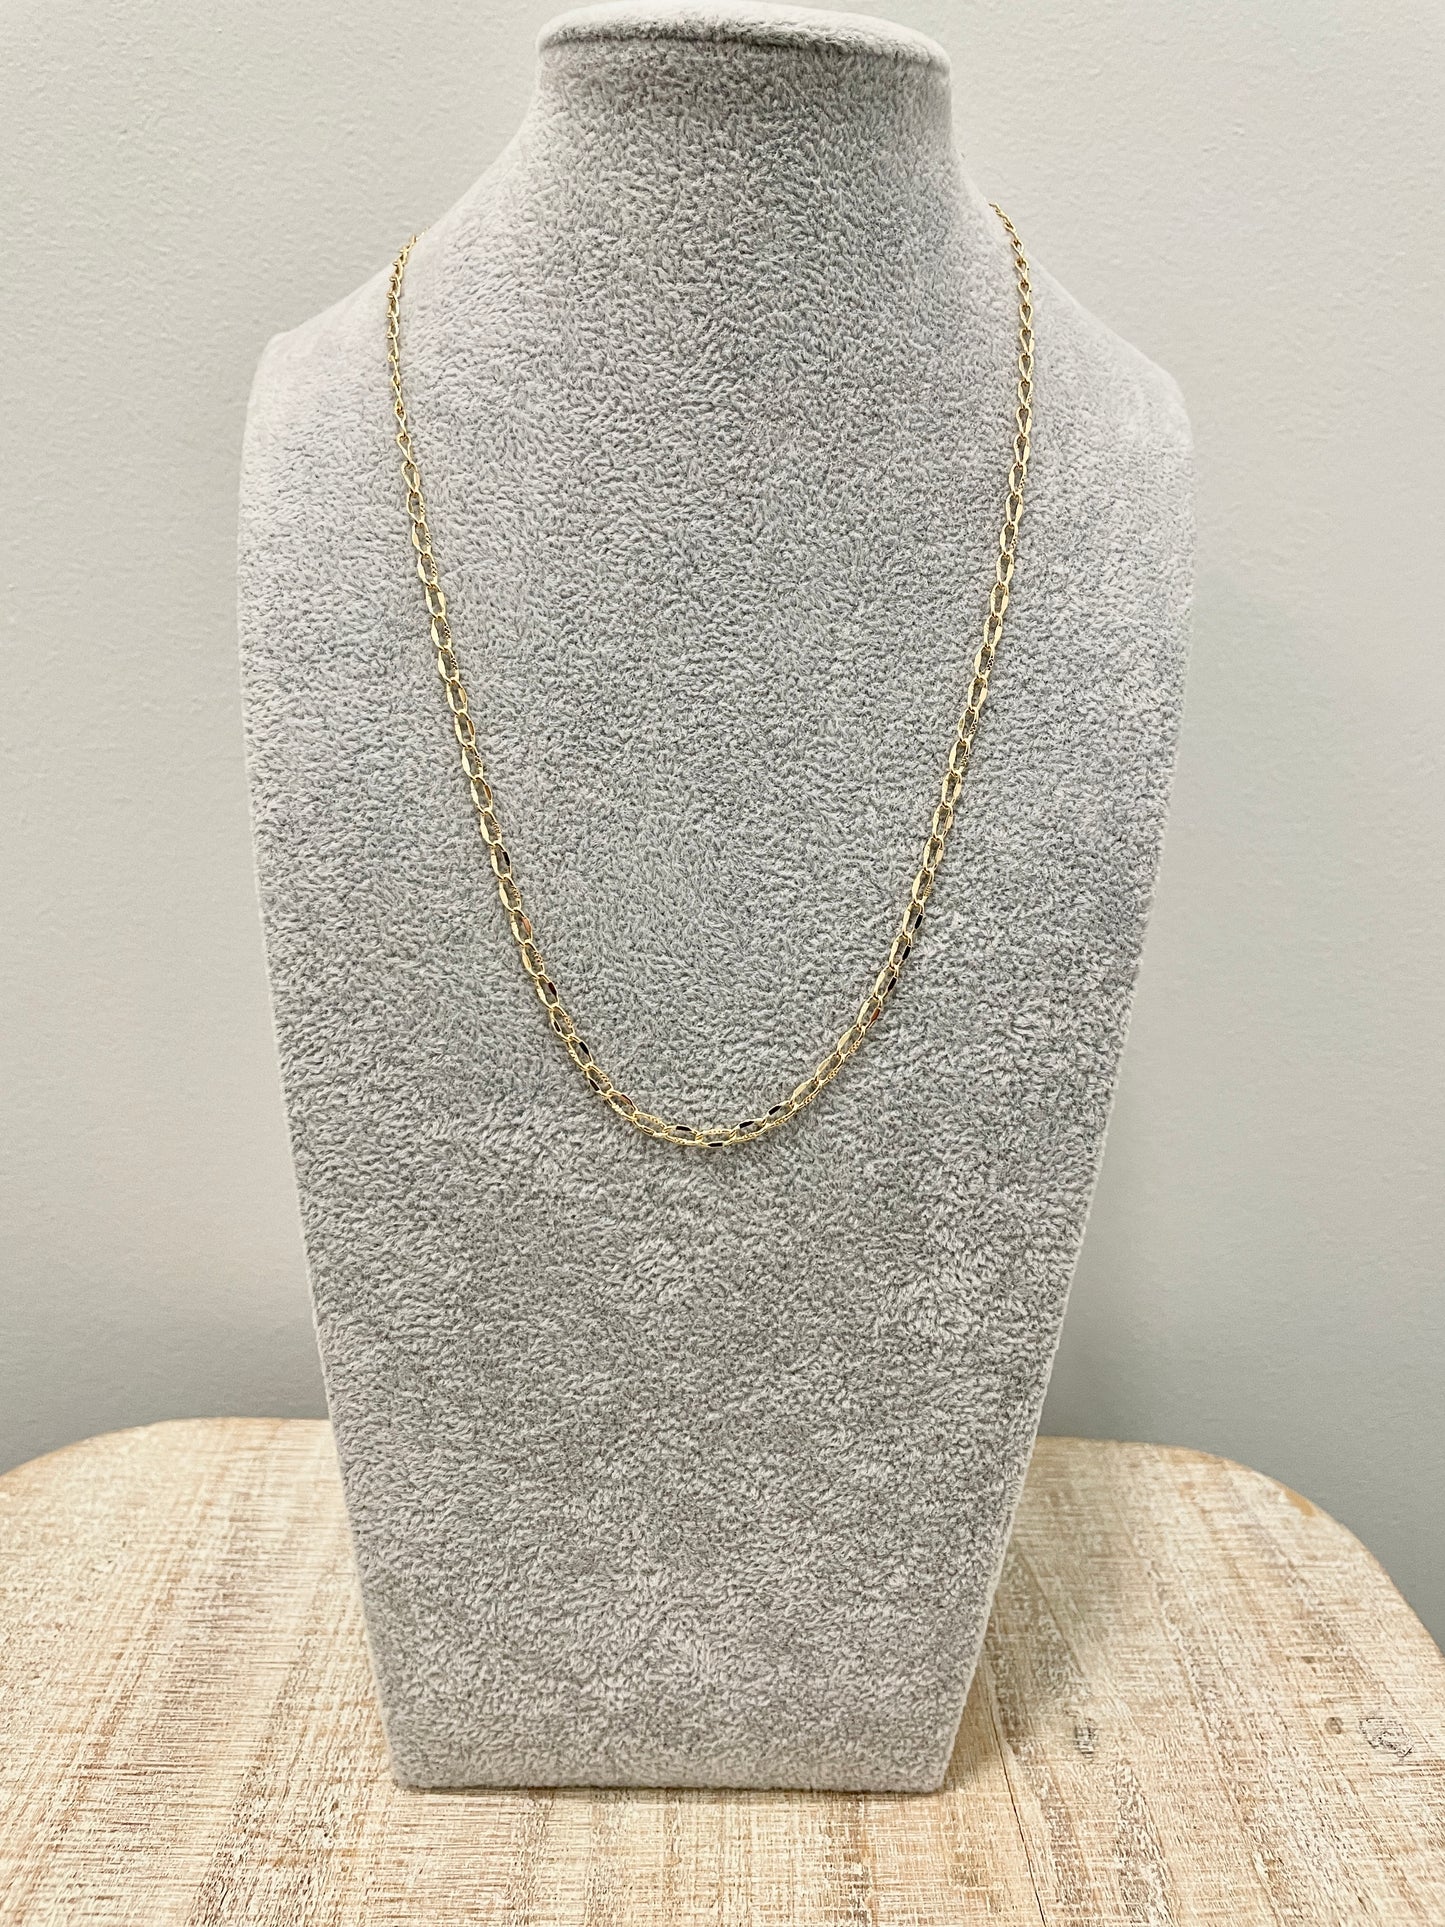 Textured Simple Chain Necklace